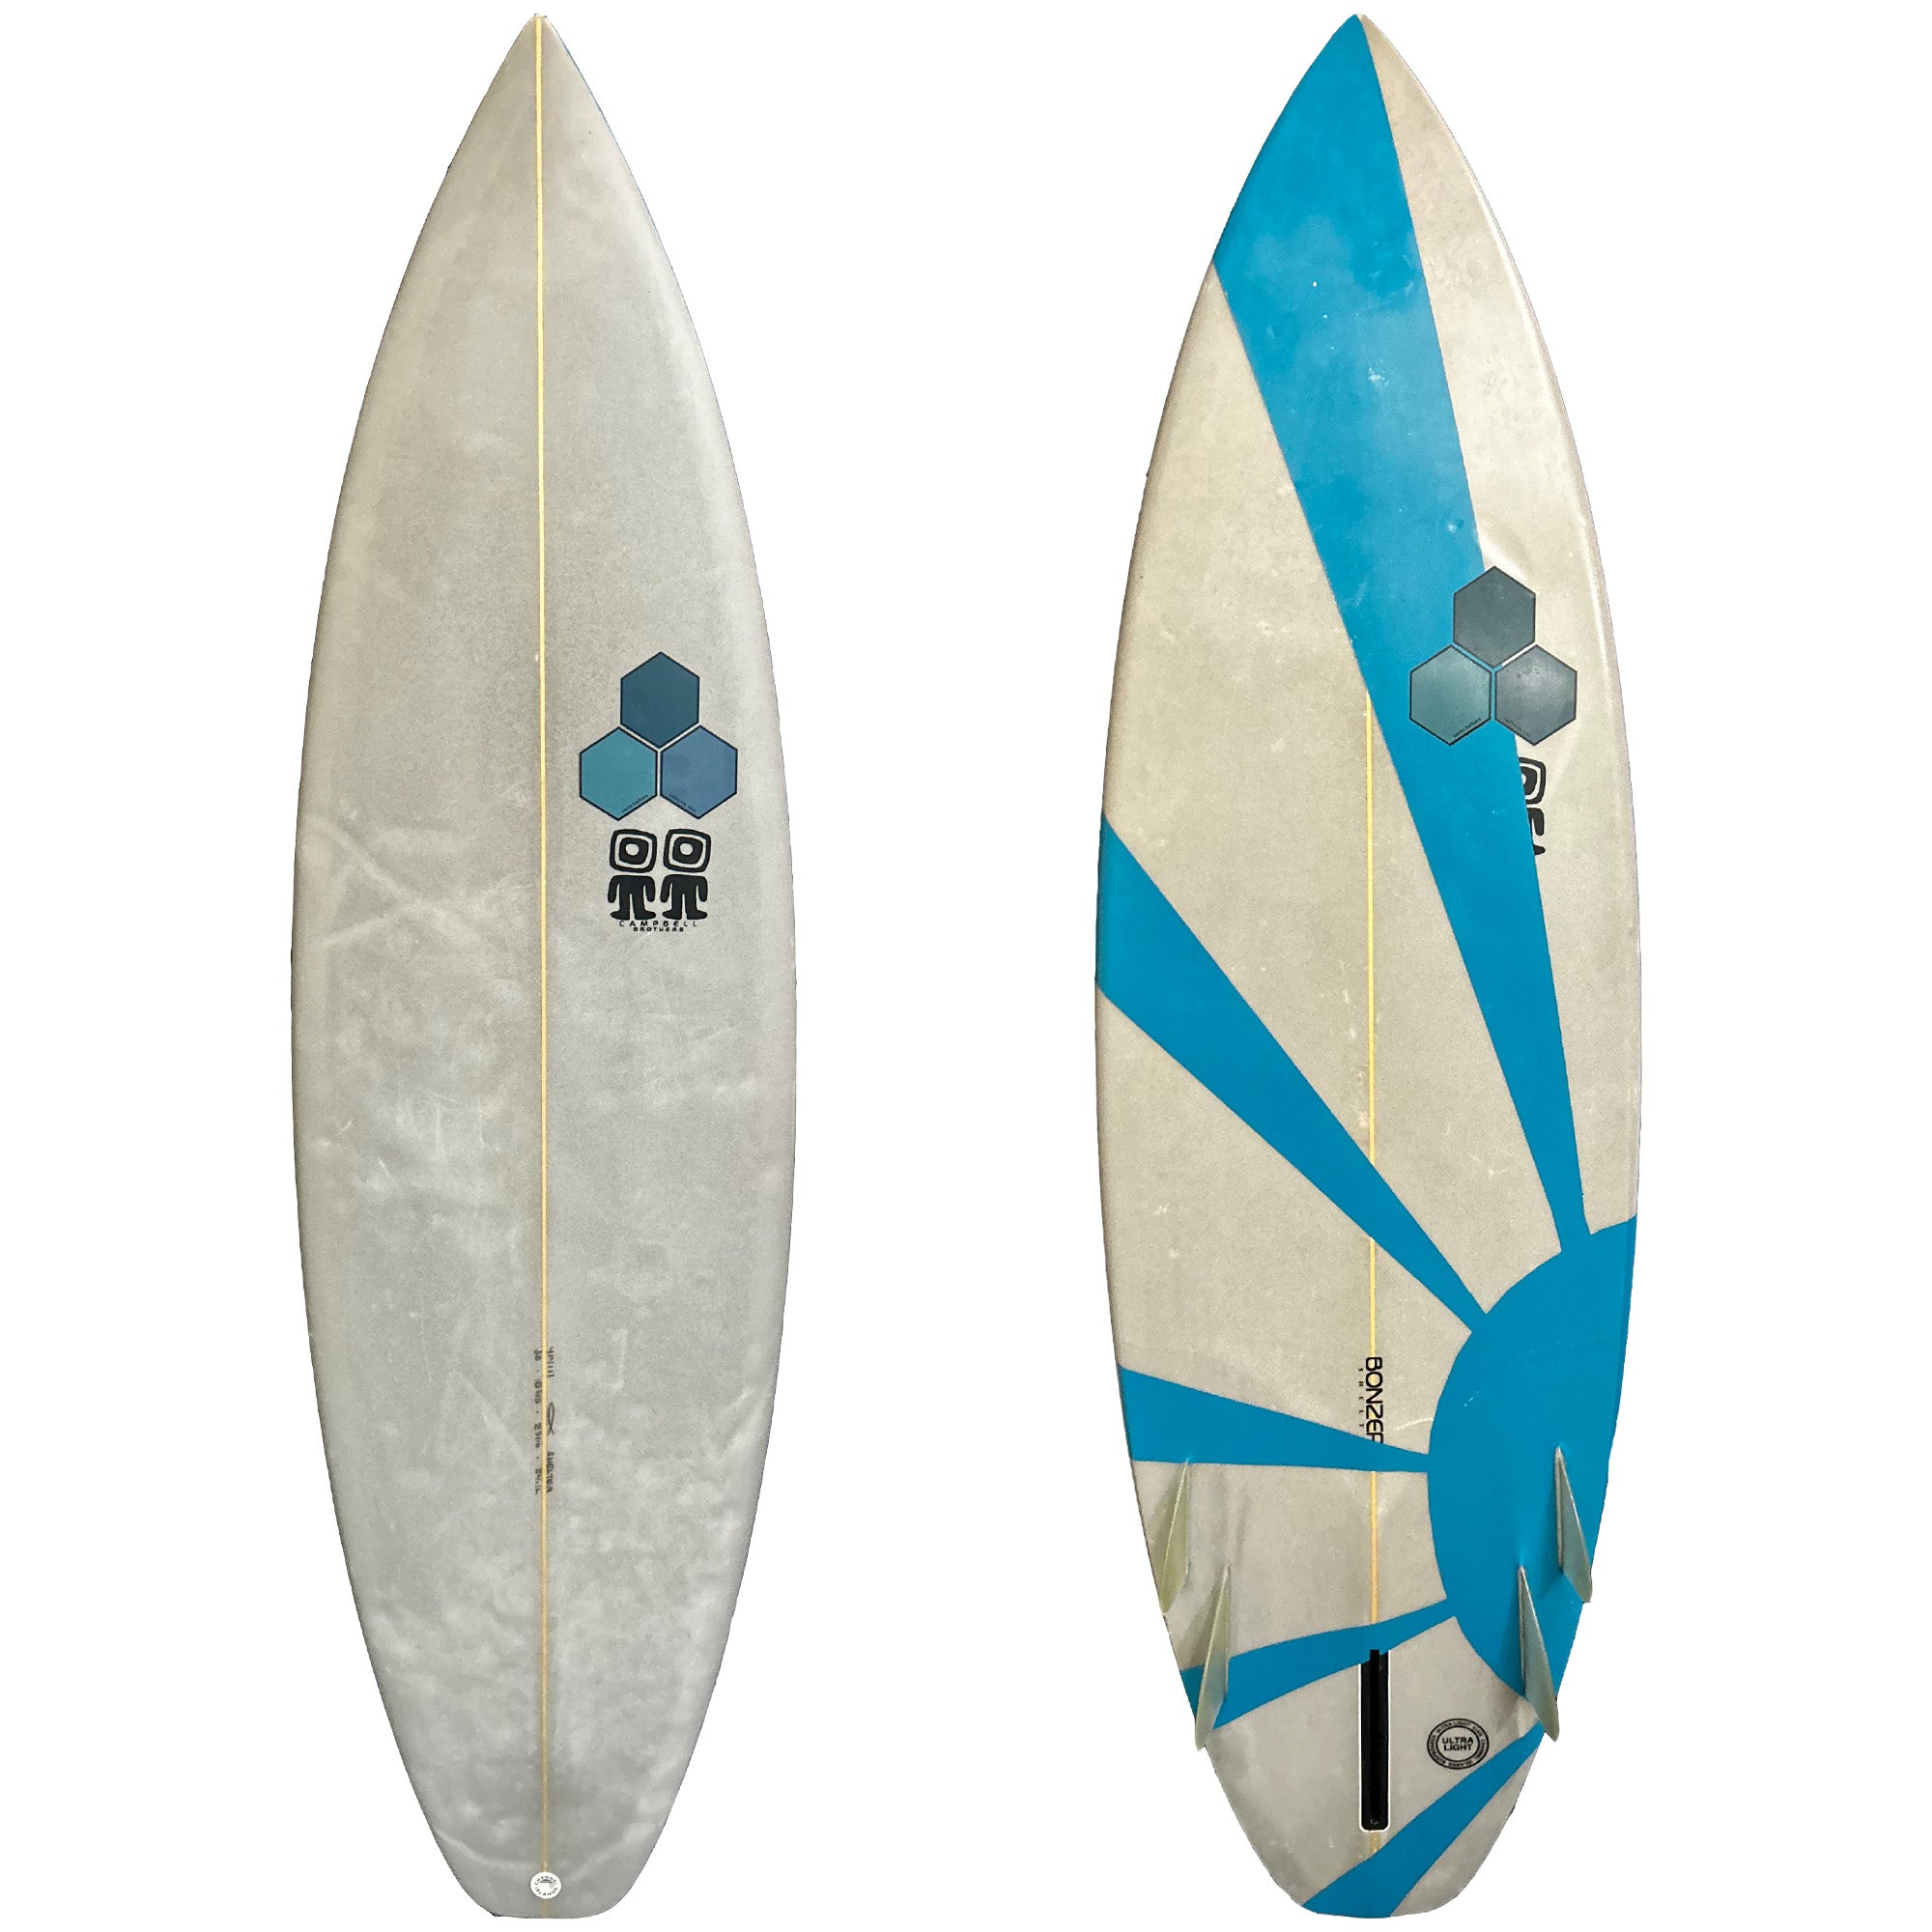 Channel Islands Campbell Brothers Bonzer 5'8 Consignment Surfboard